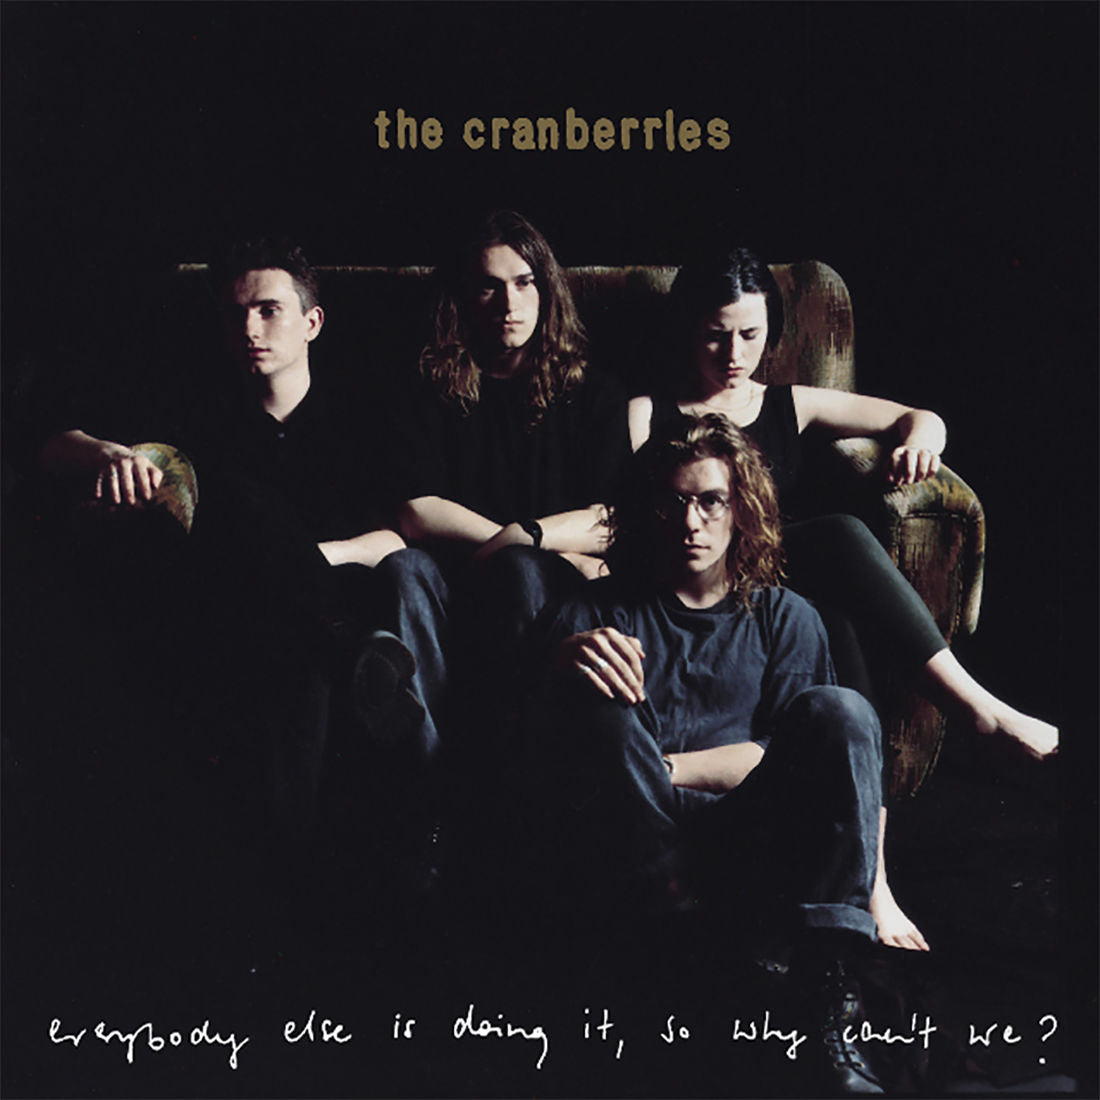 THE CRANBERRIES - Everybody Else Is Doing It, So Why Cant We? (25th Anniv. Ed.) - LP - Vinyl